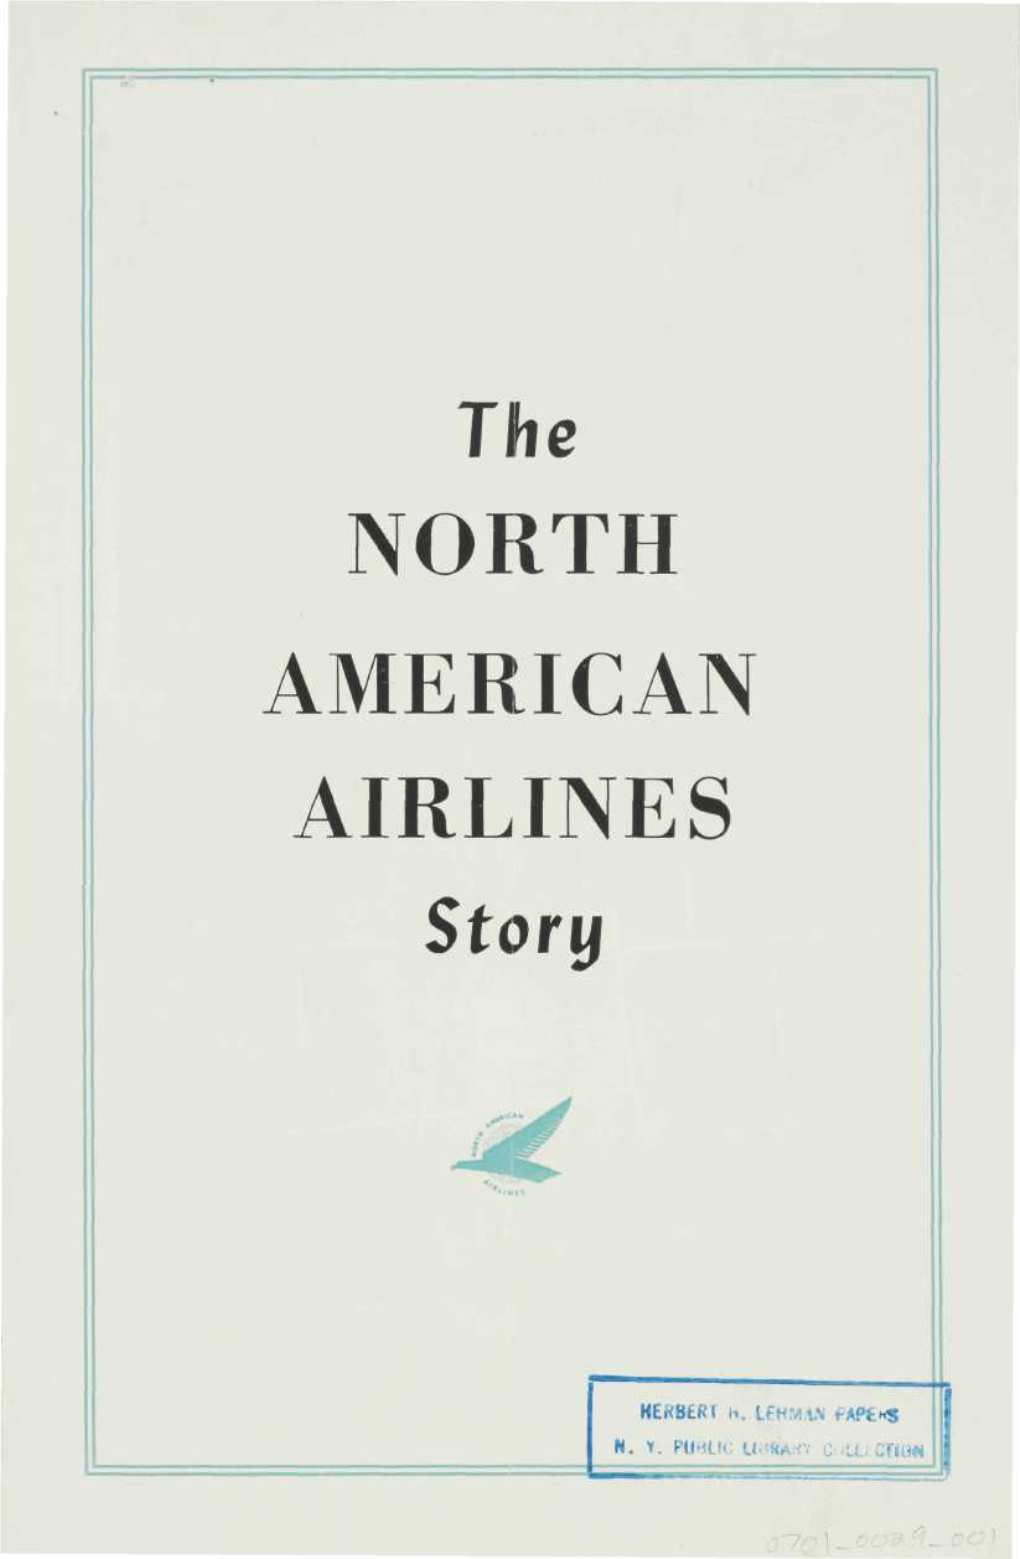 NORTH AMERICAN AIRLINES Story